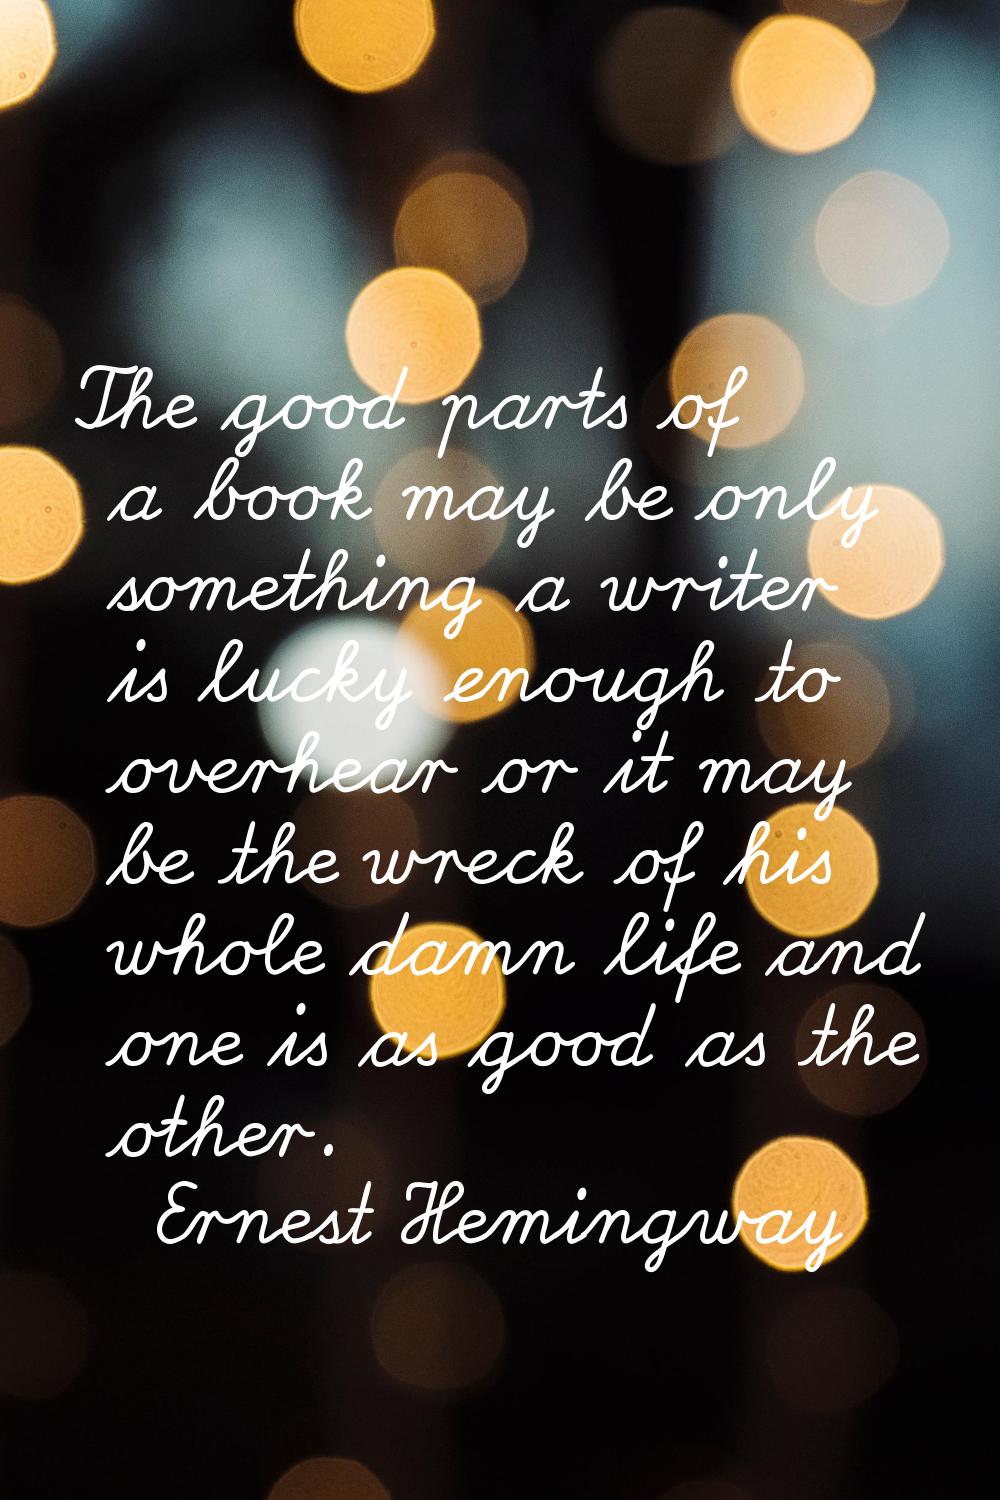 The good parts of a book may be only something a writer is lucky enough to overhear or it may be th